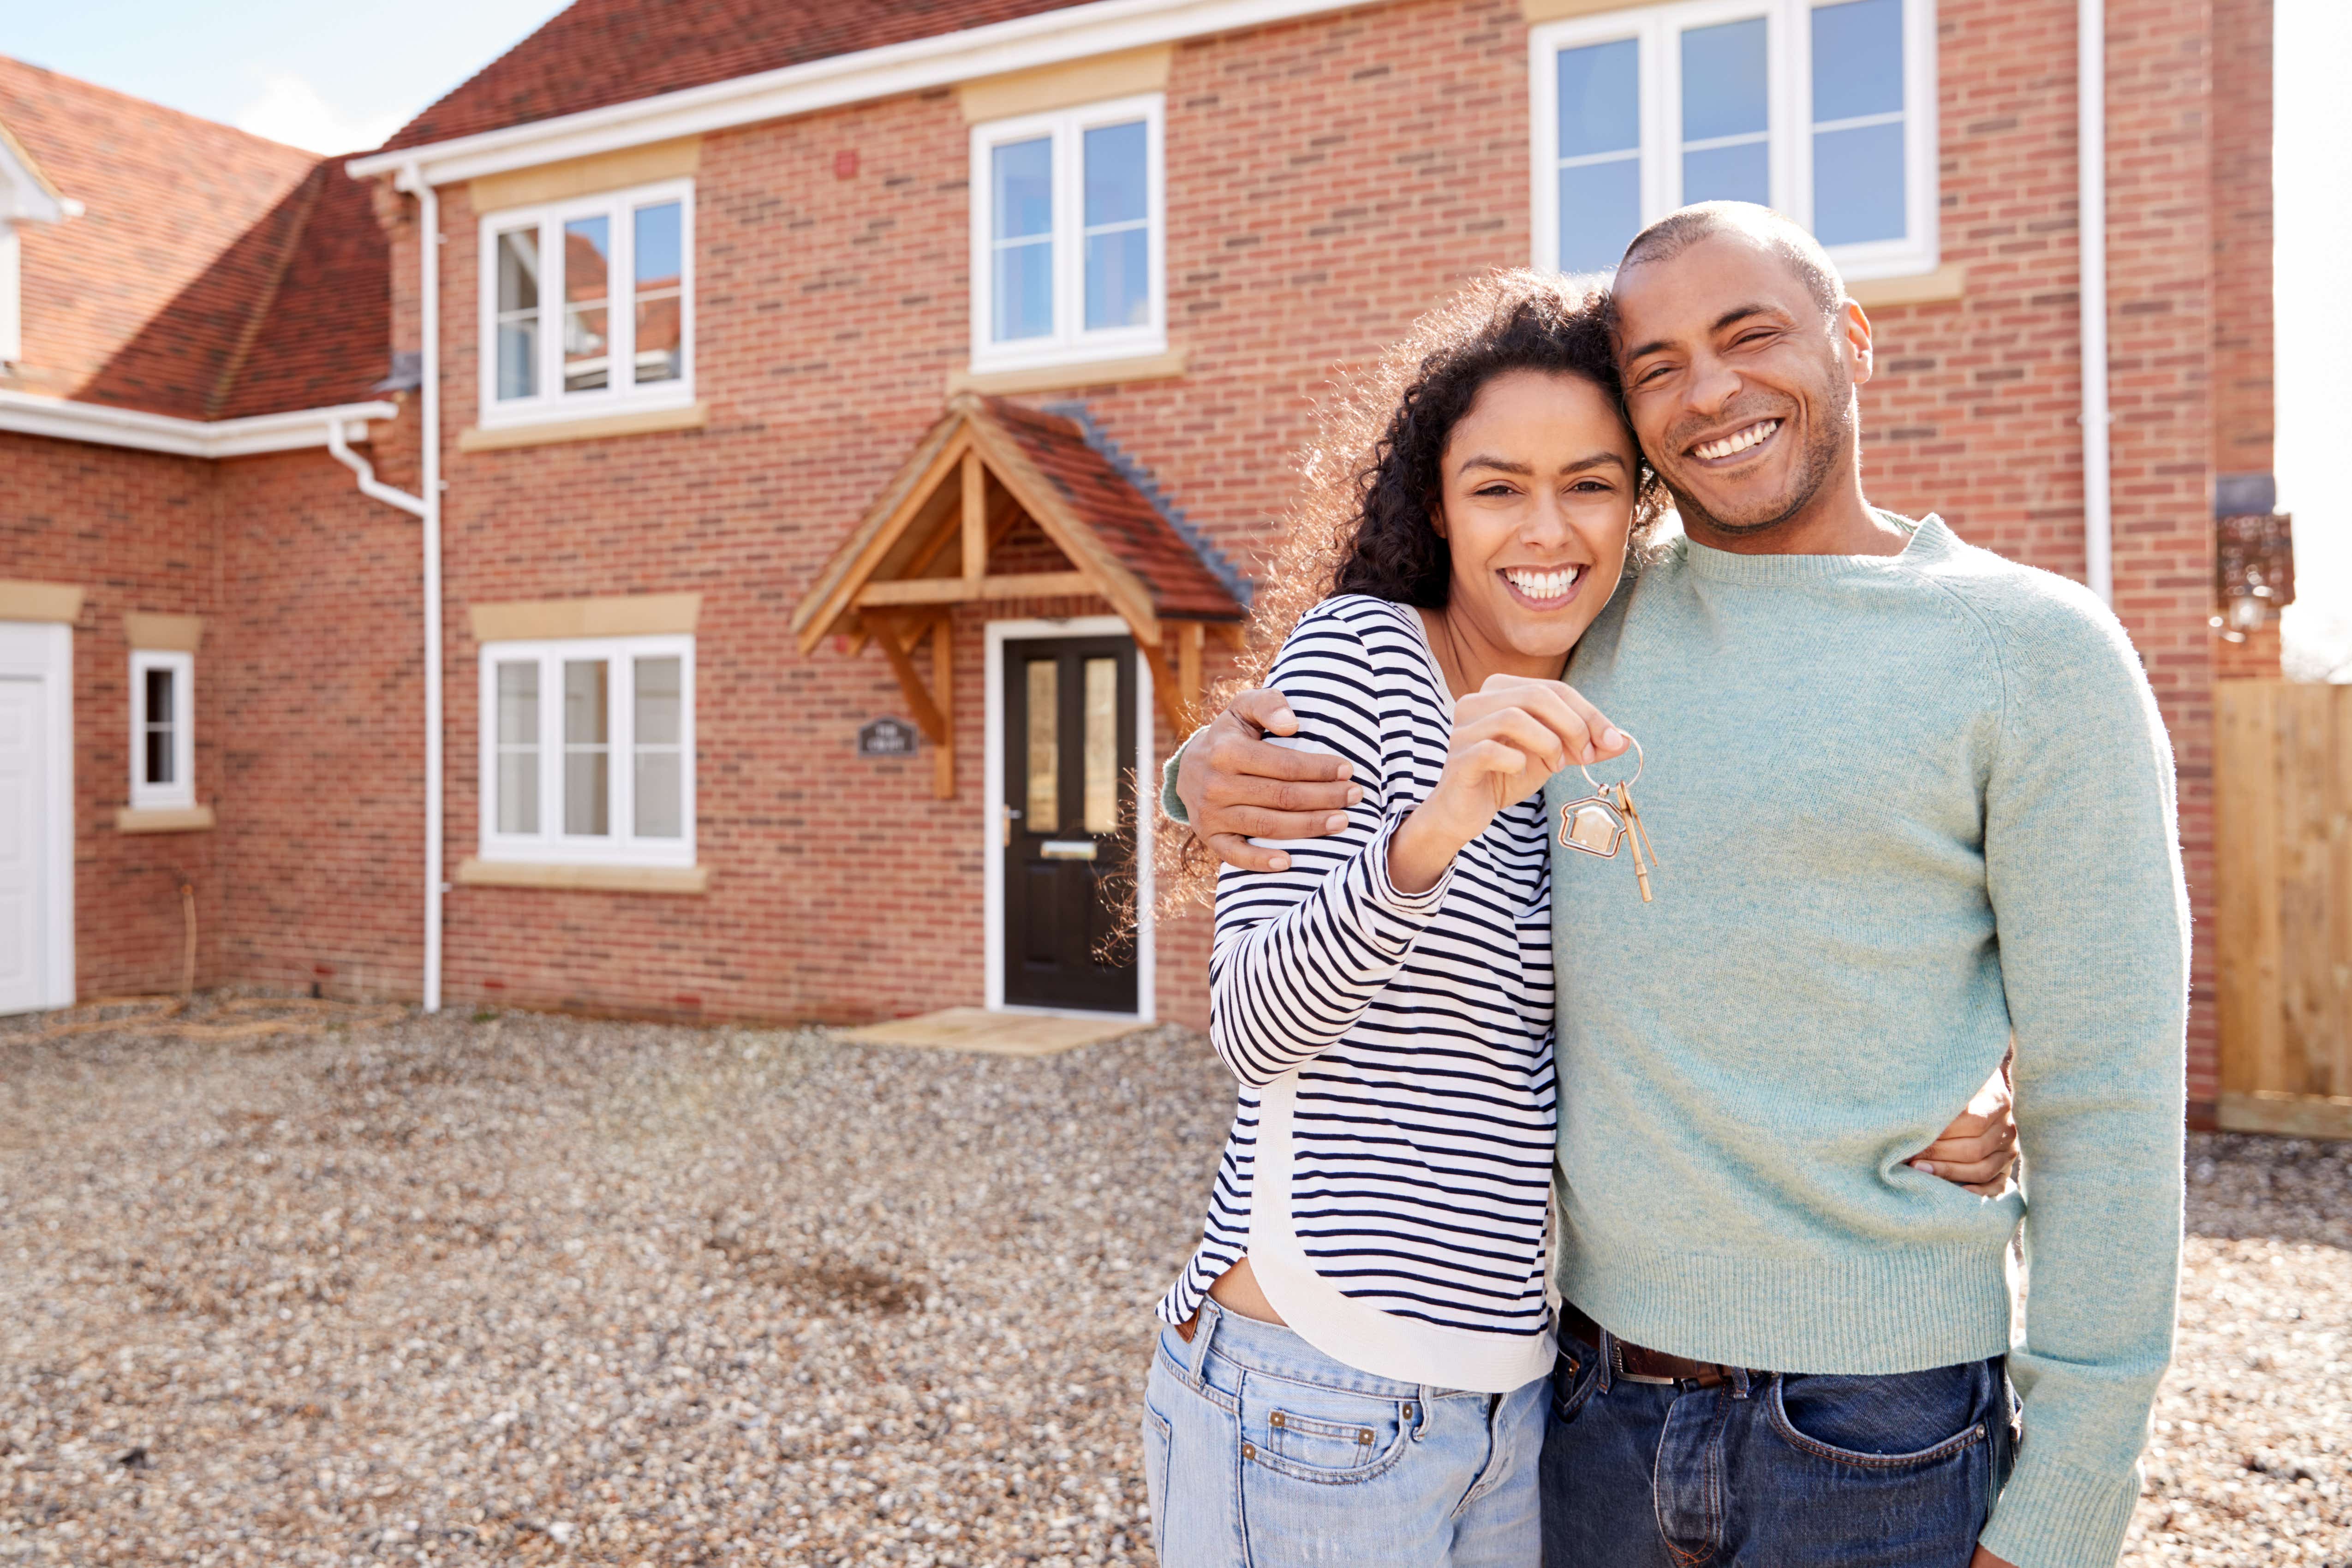 The Help to Buy ISA scheme has supported first time buyers for the past eight years
